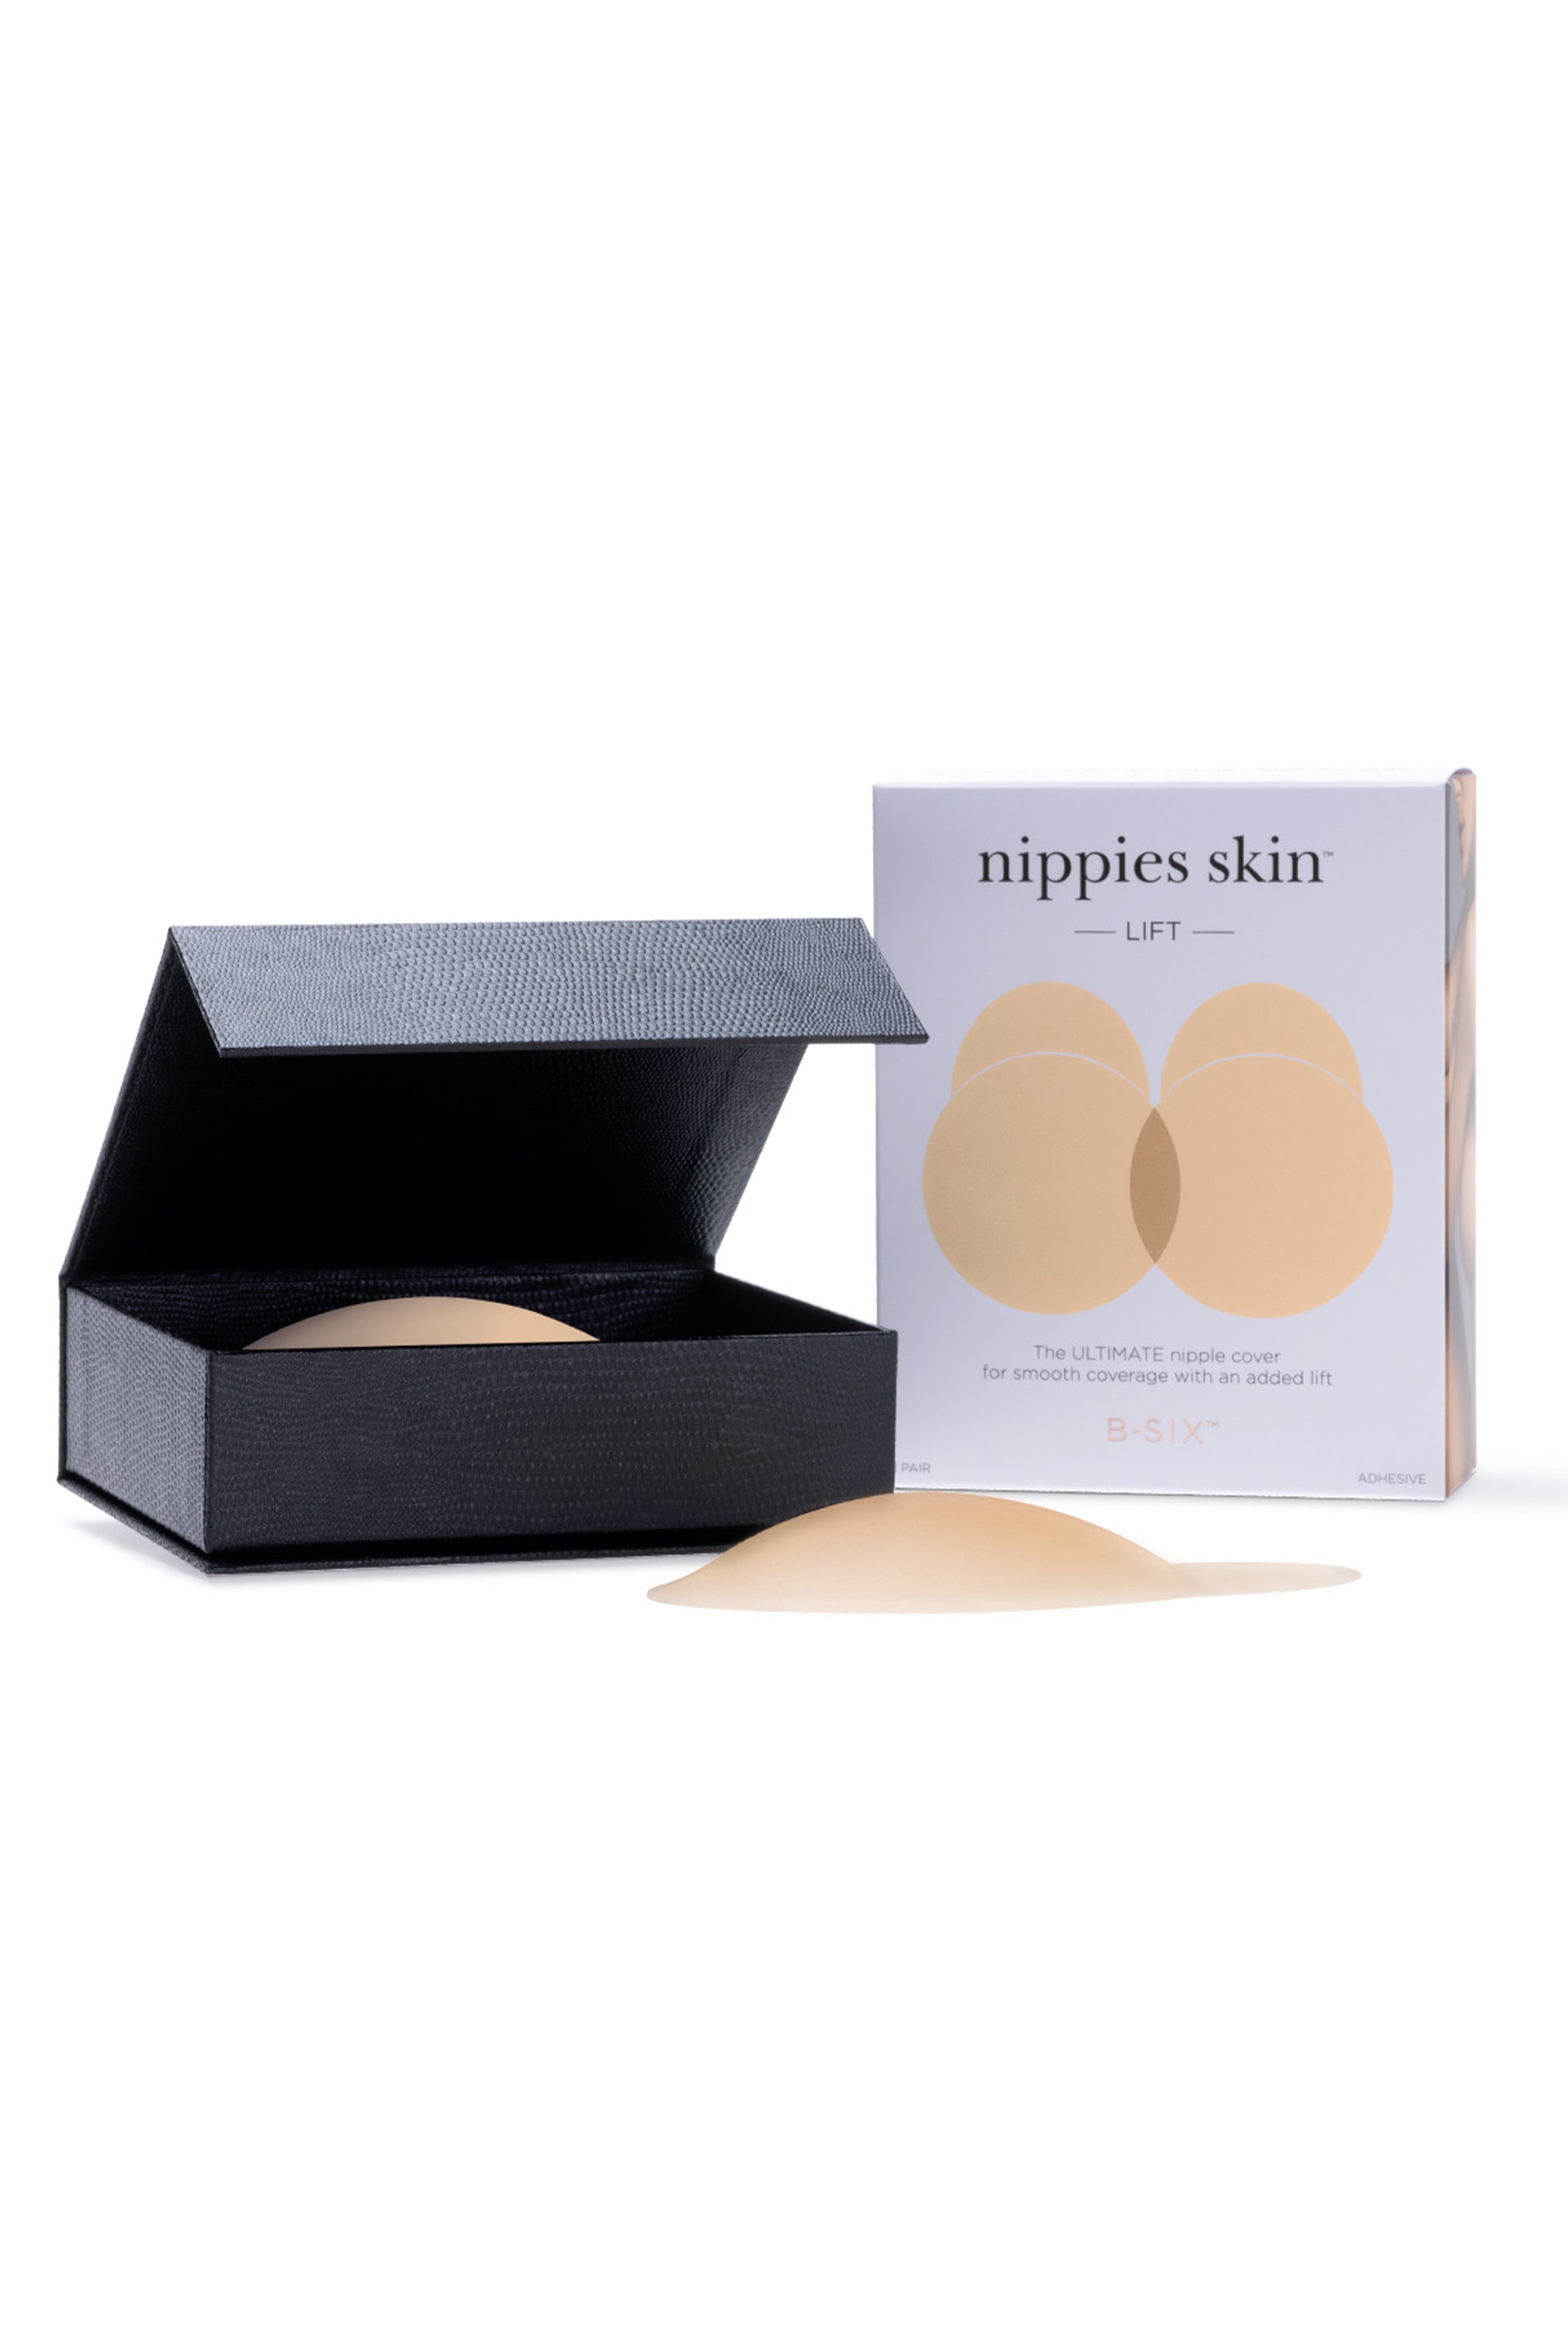 Nippies Nipple Pasties - Adhesive Silicone Breast Covers, Caramel